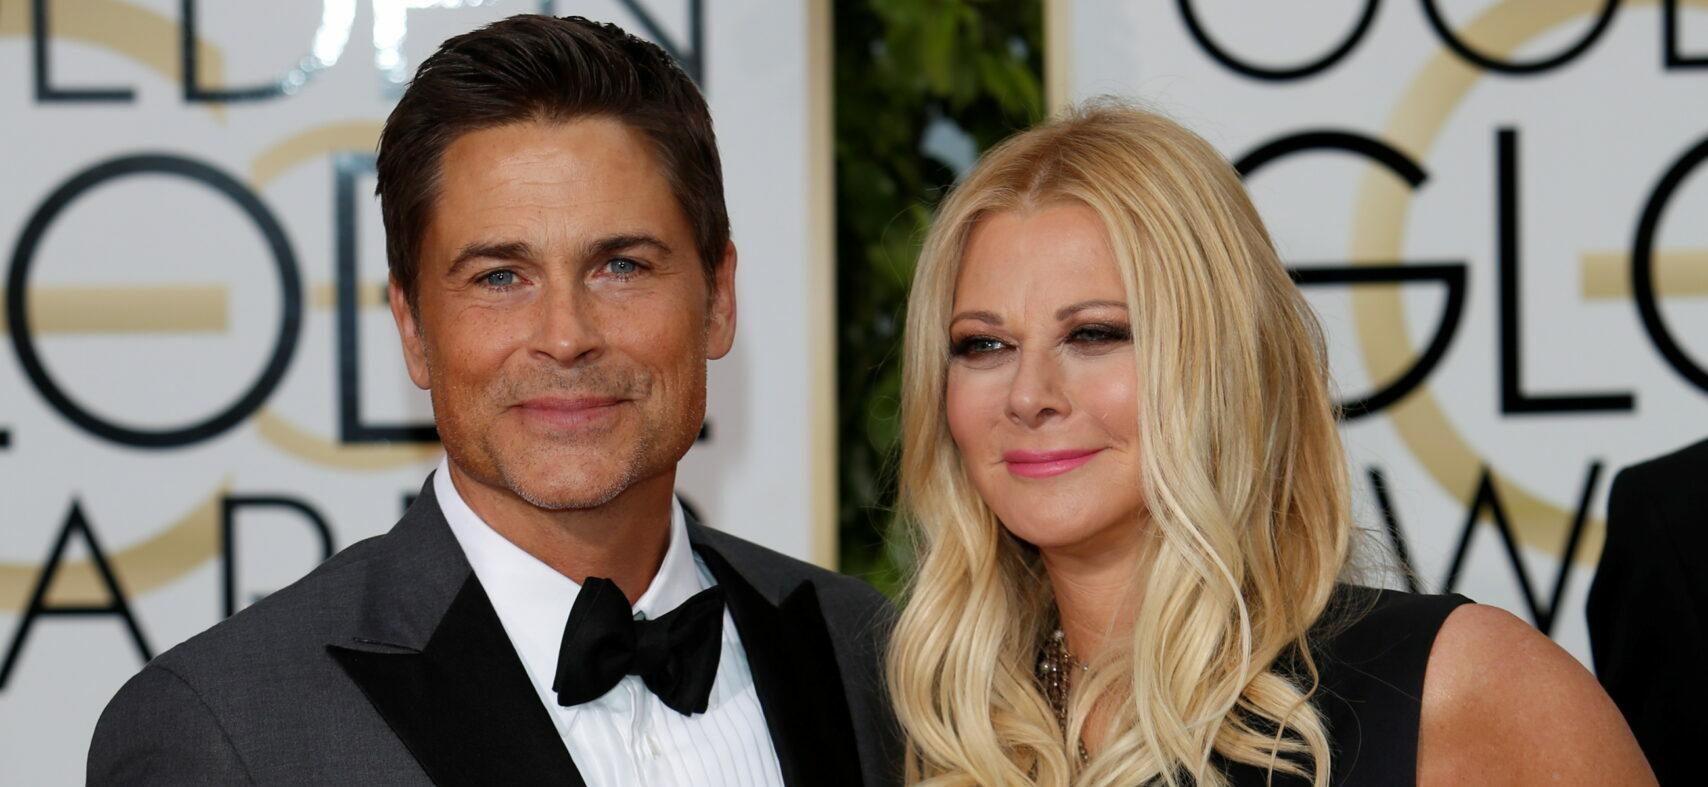 Rob Lowe Marks 32nd Wedding Anniversary With Heartfelt Tribute To ‘Unique’ Wife Sheryl Berkoff